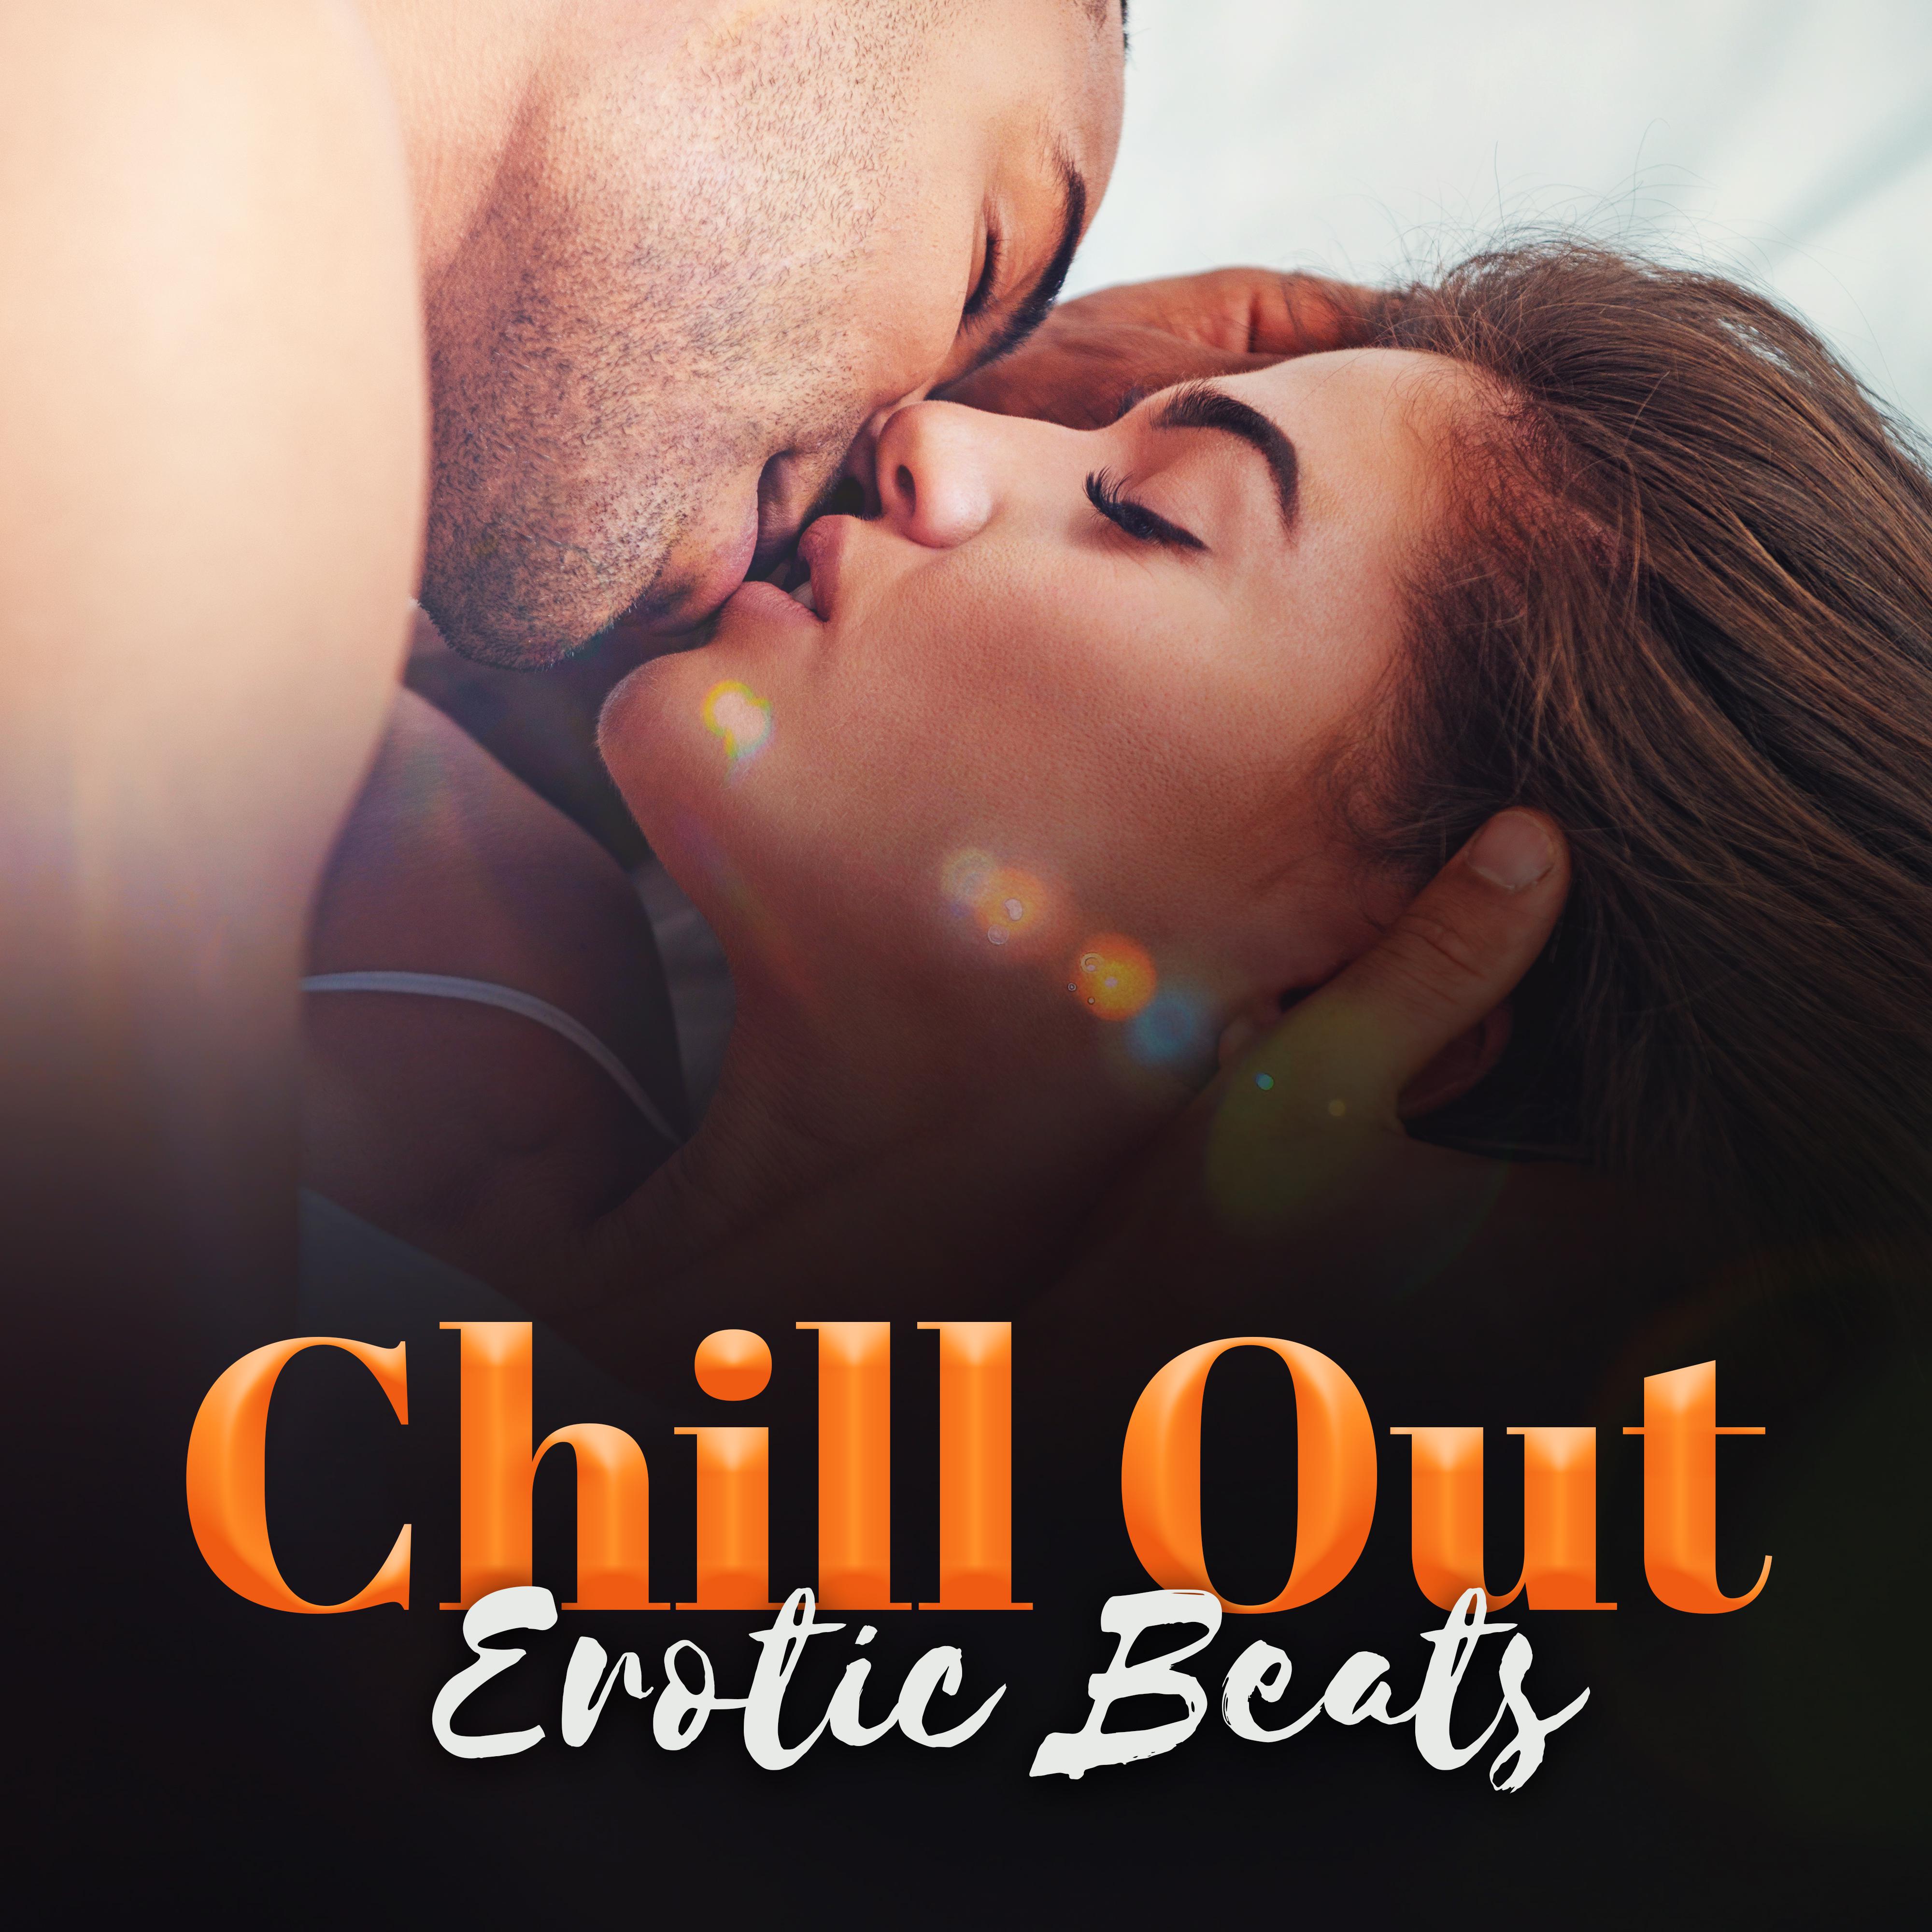 Chill Out Erotic Beats – Summer Sounds 2017, Ibiza Lovers, **** Dance, Party Night